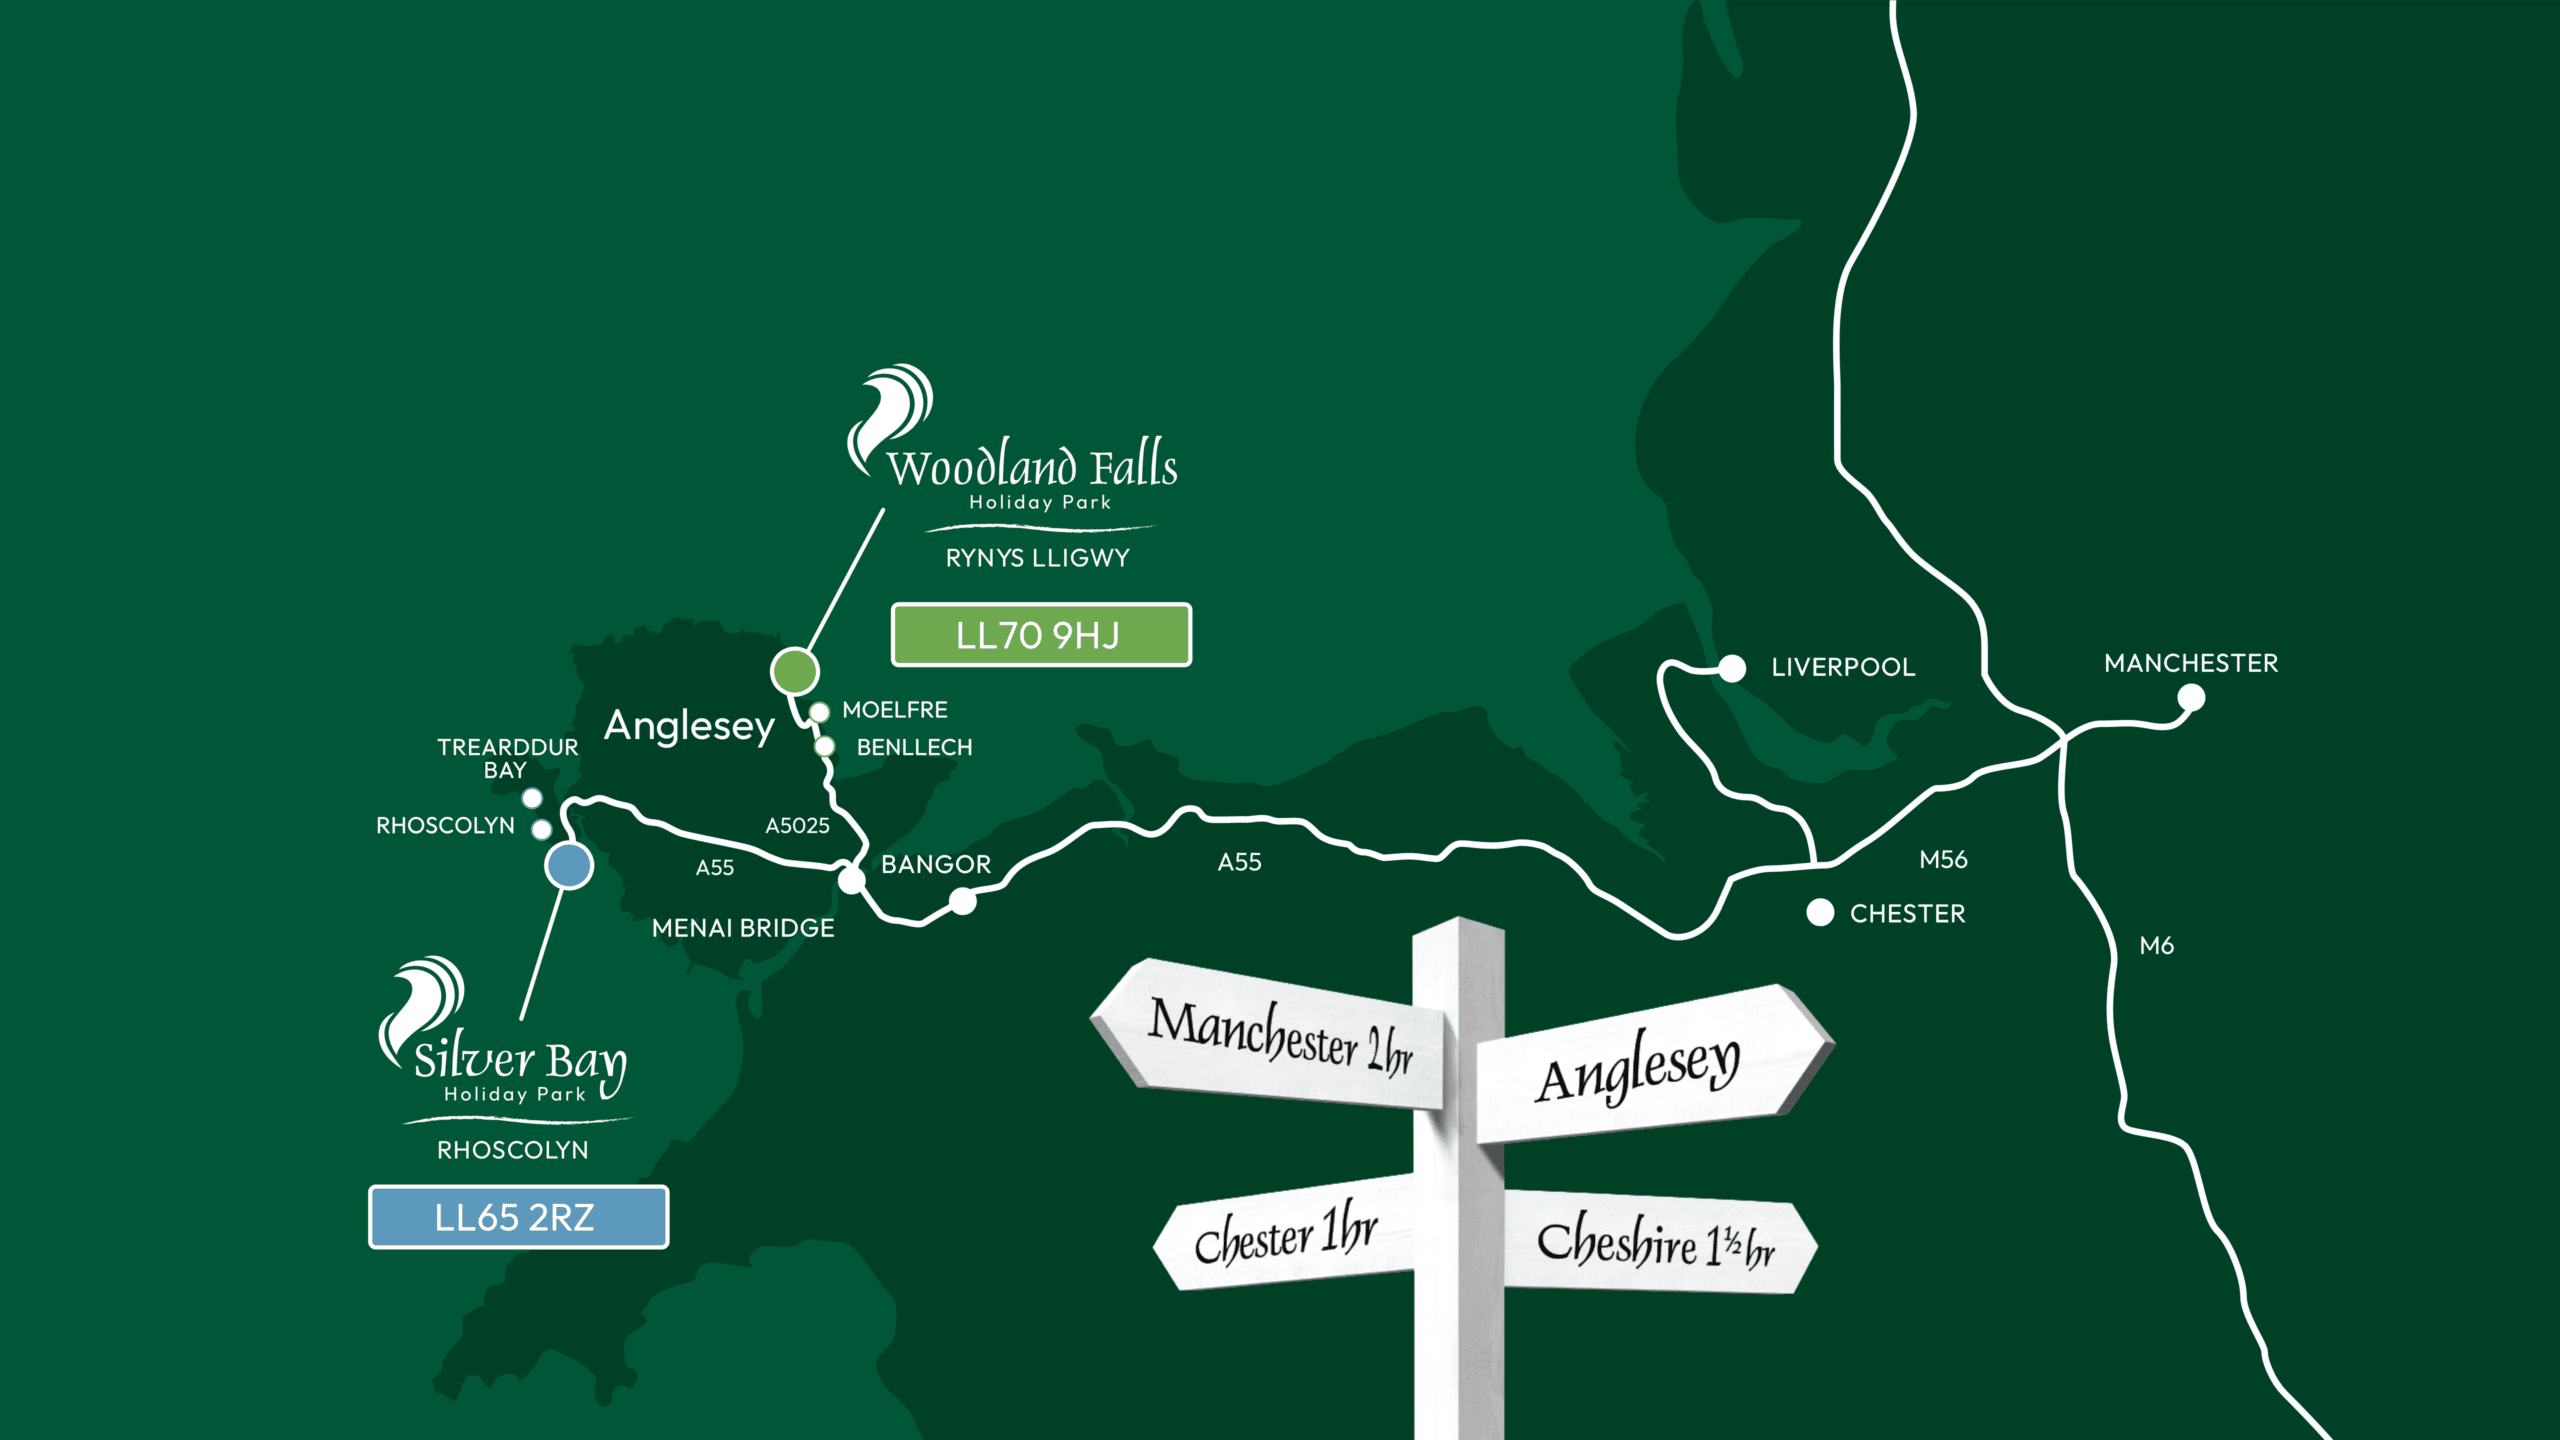 https://bulmerleisure.co.uk/wp-content/uploads/2022/12/SilverBay-Anglesey-Map-2560-x-1440px.png